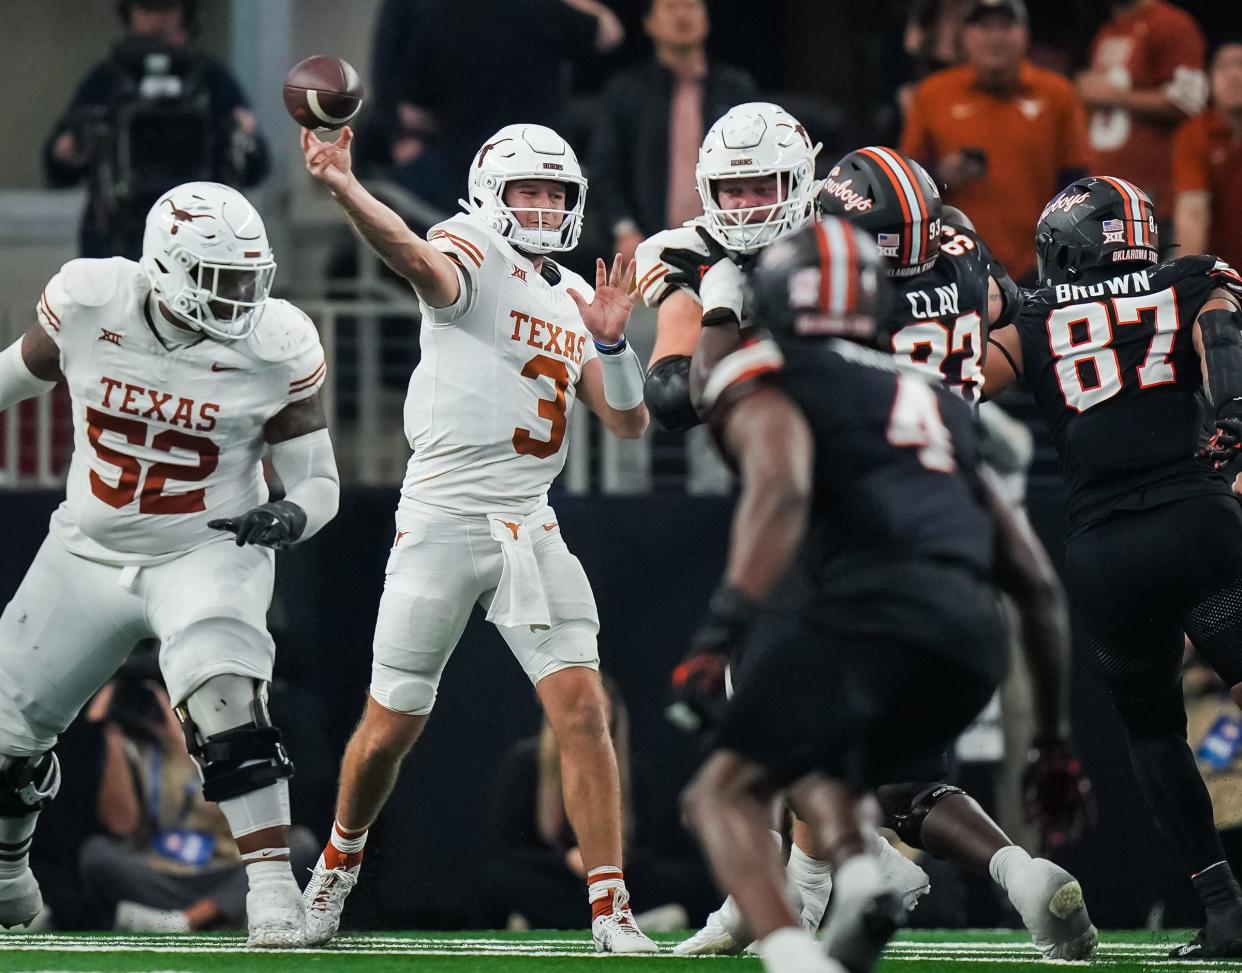 Texas quarterback Quinn Ewers throws during the third quarter of the Longhorns' 49-21 win over Oklahoma State.